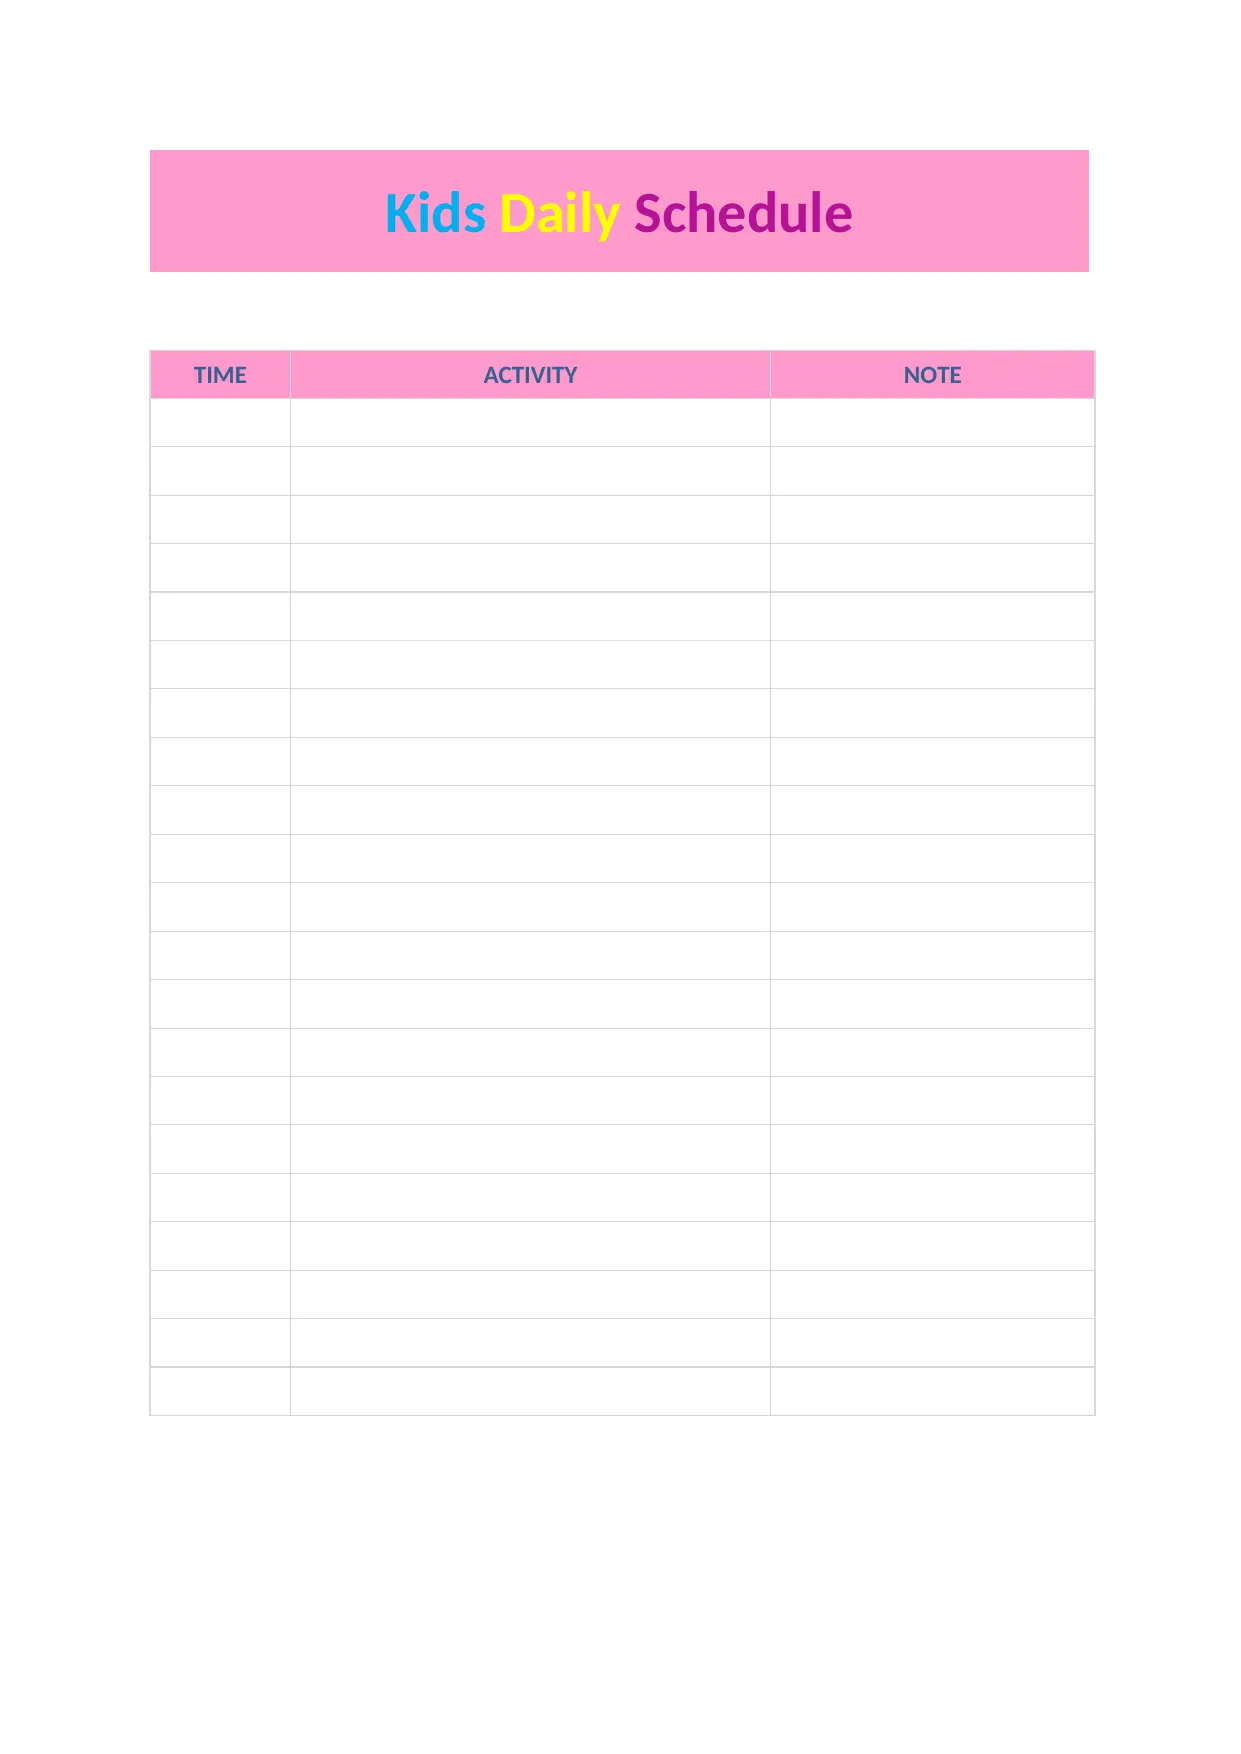 Kids Daily Schedule Template: Free Printable